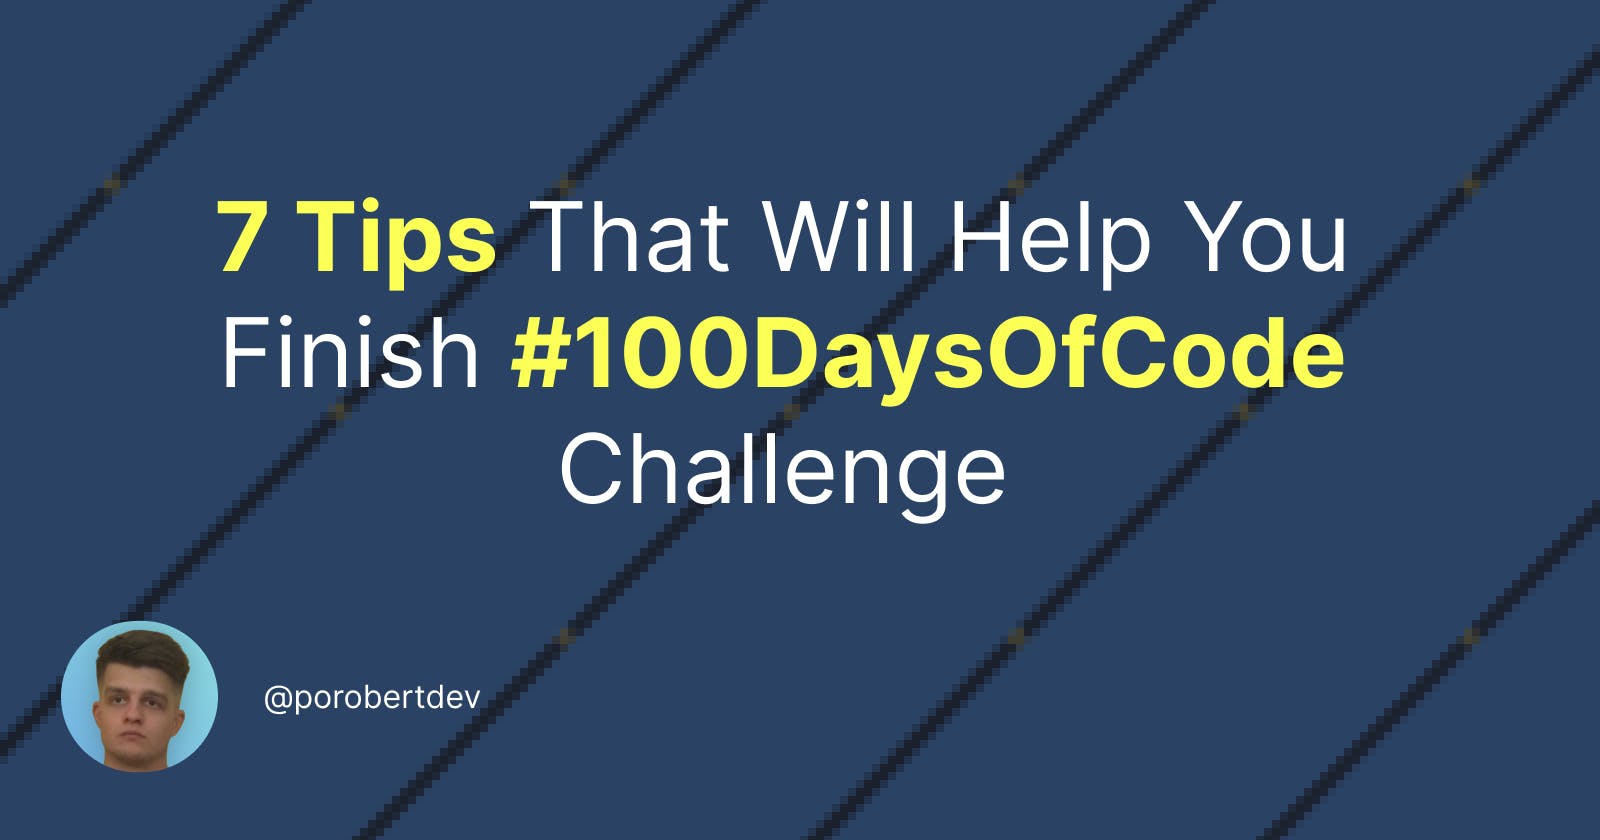 7 Tips That Will Help You Finish #100DaysOfCode Challenge